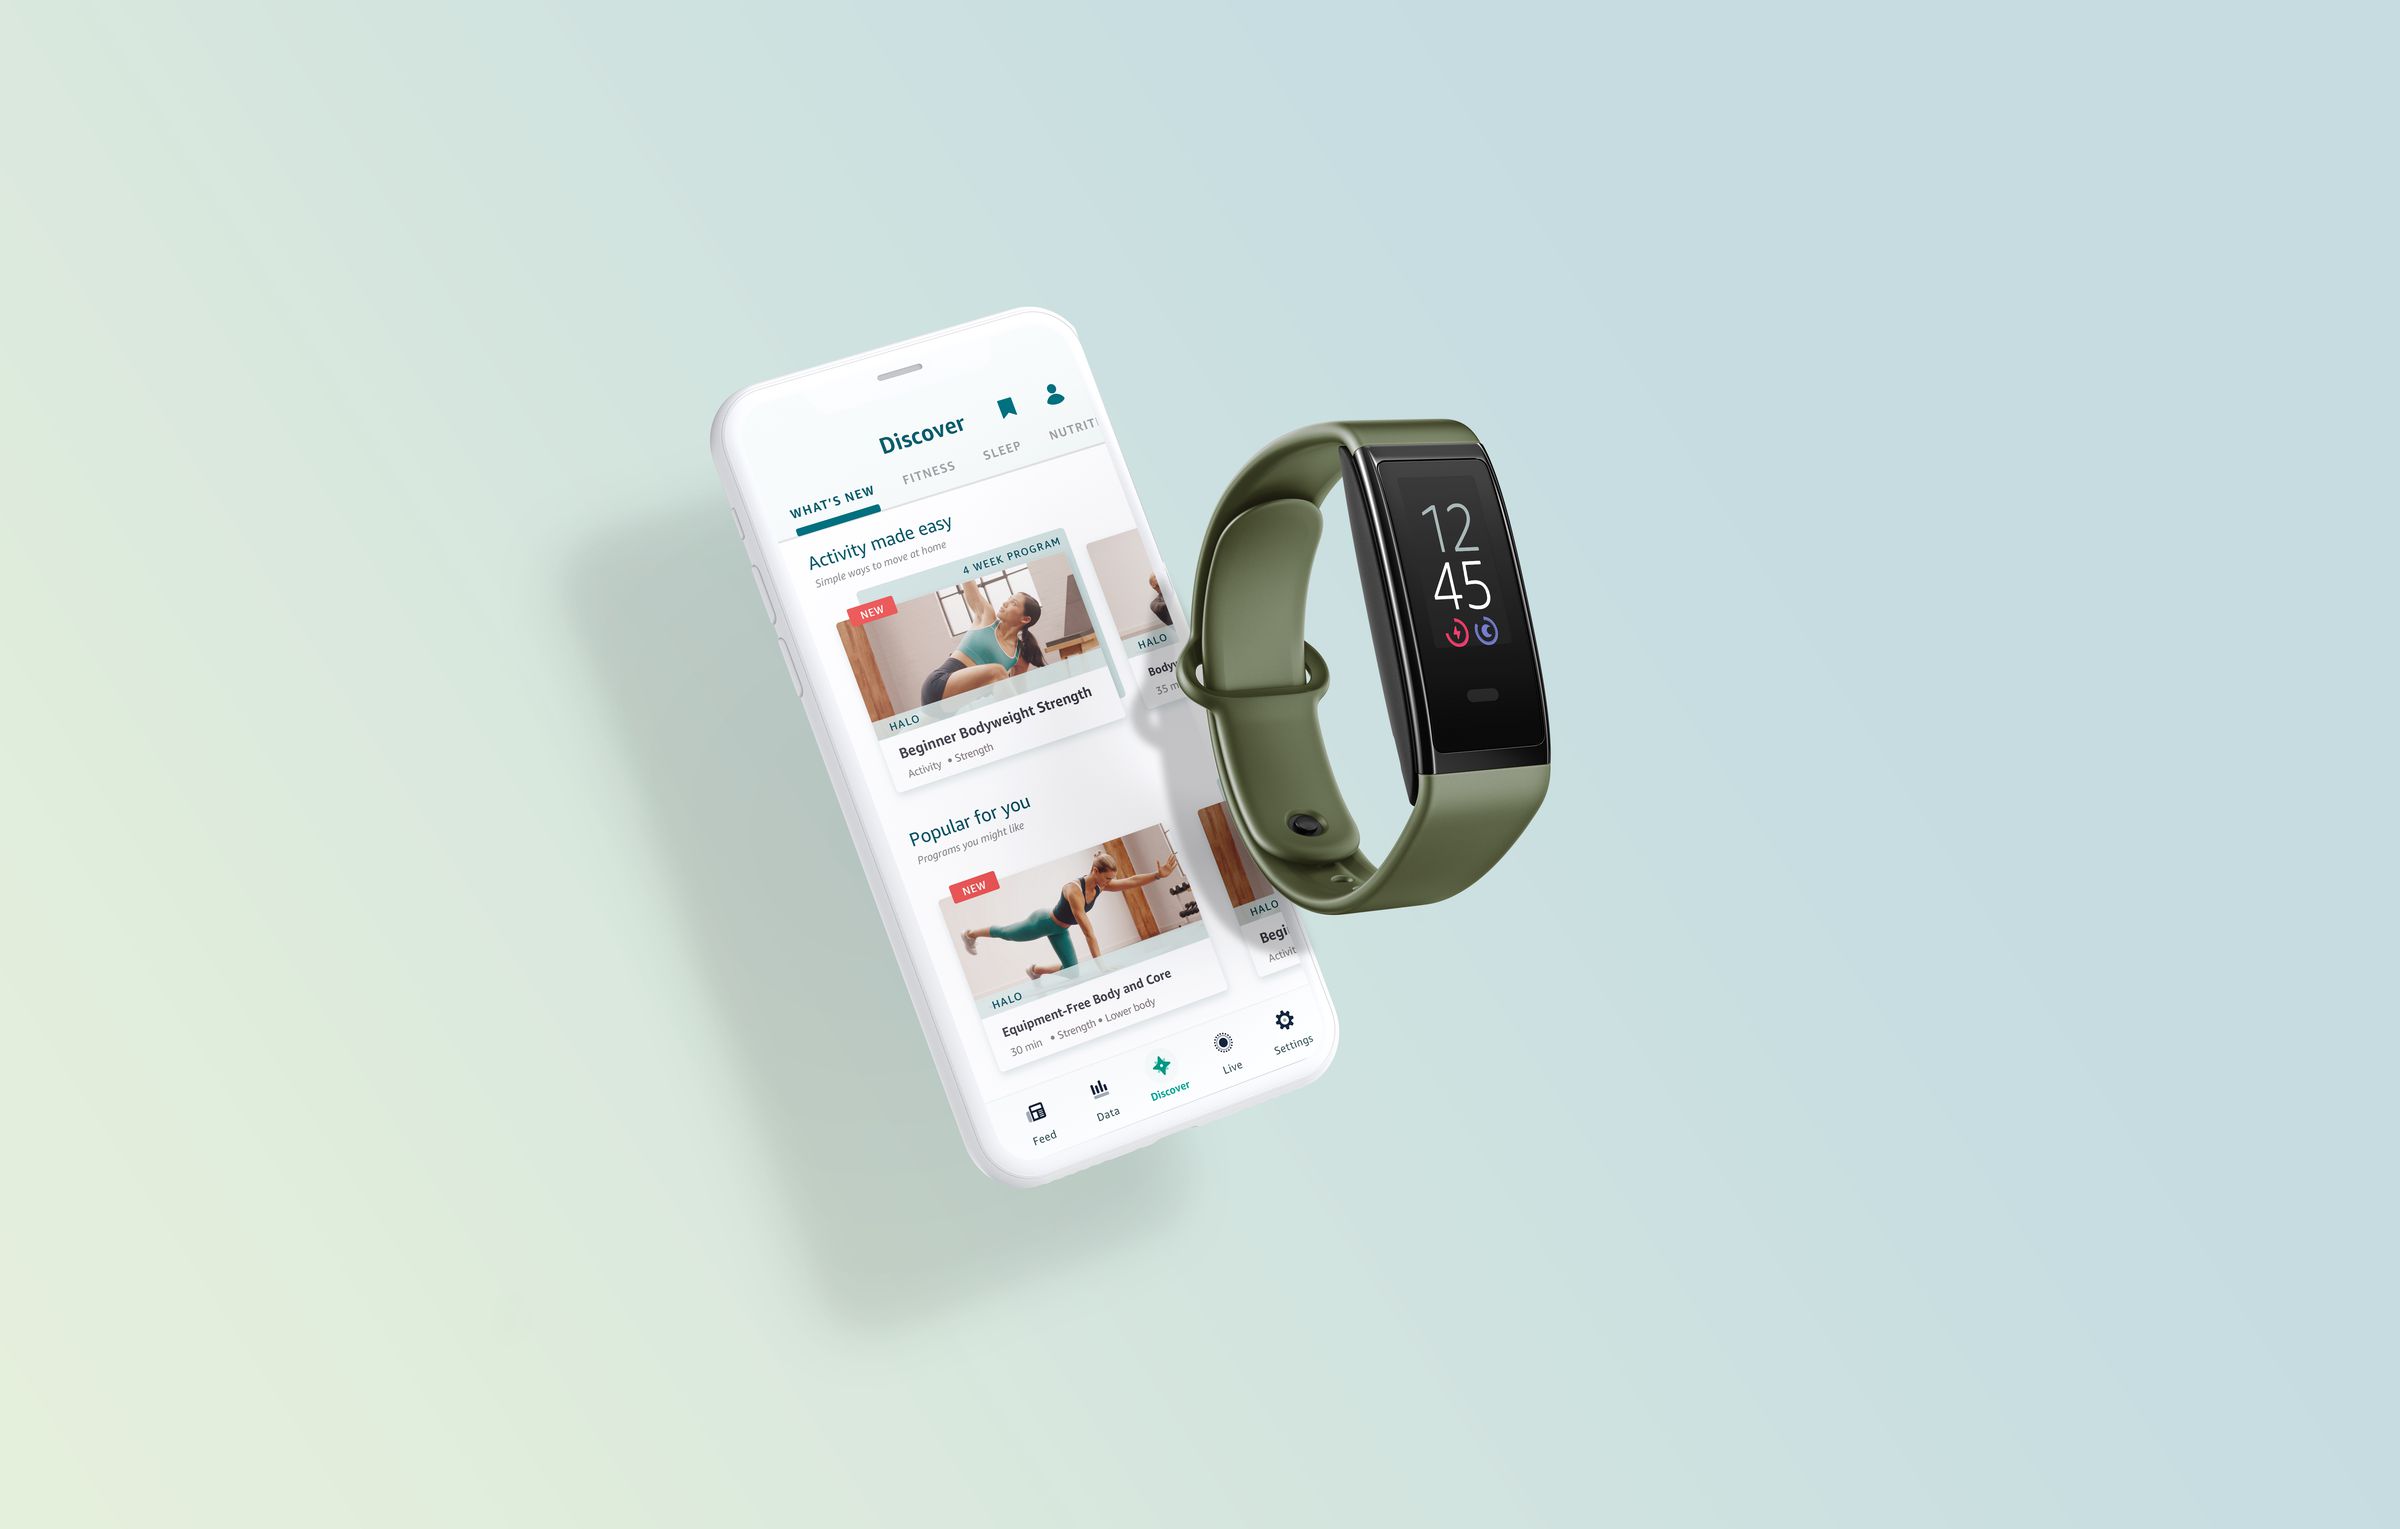 The Halo App provides access to your fitness data, workouts, recipes, and more.